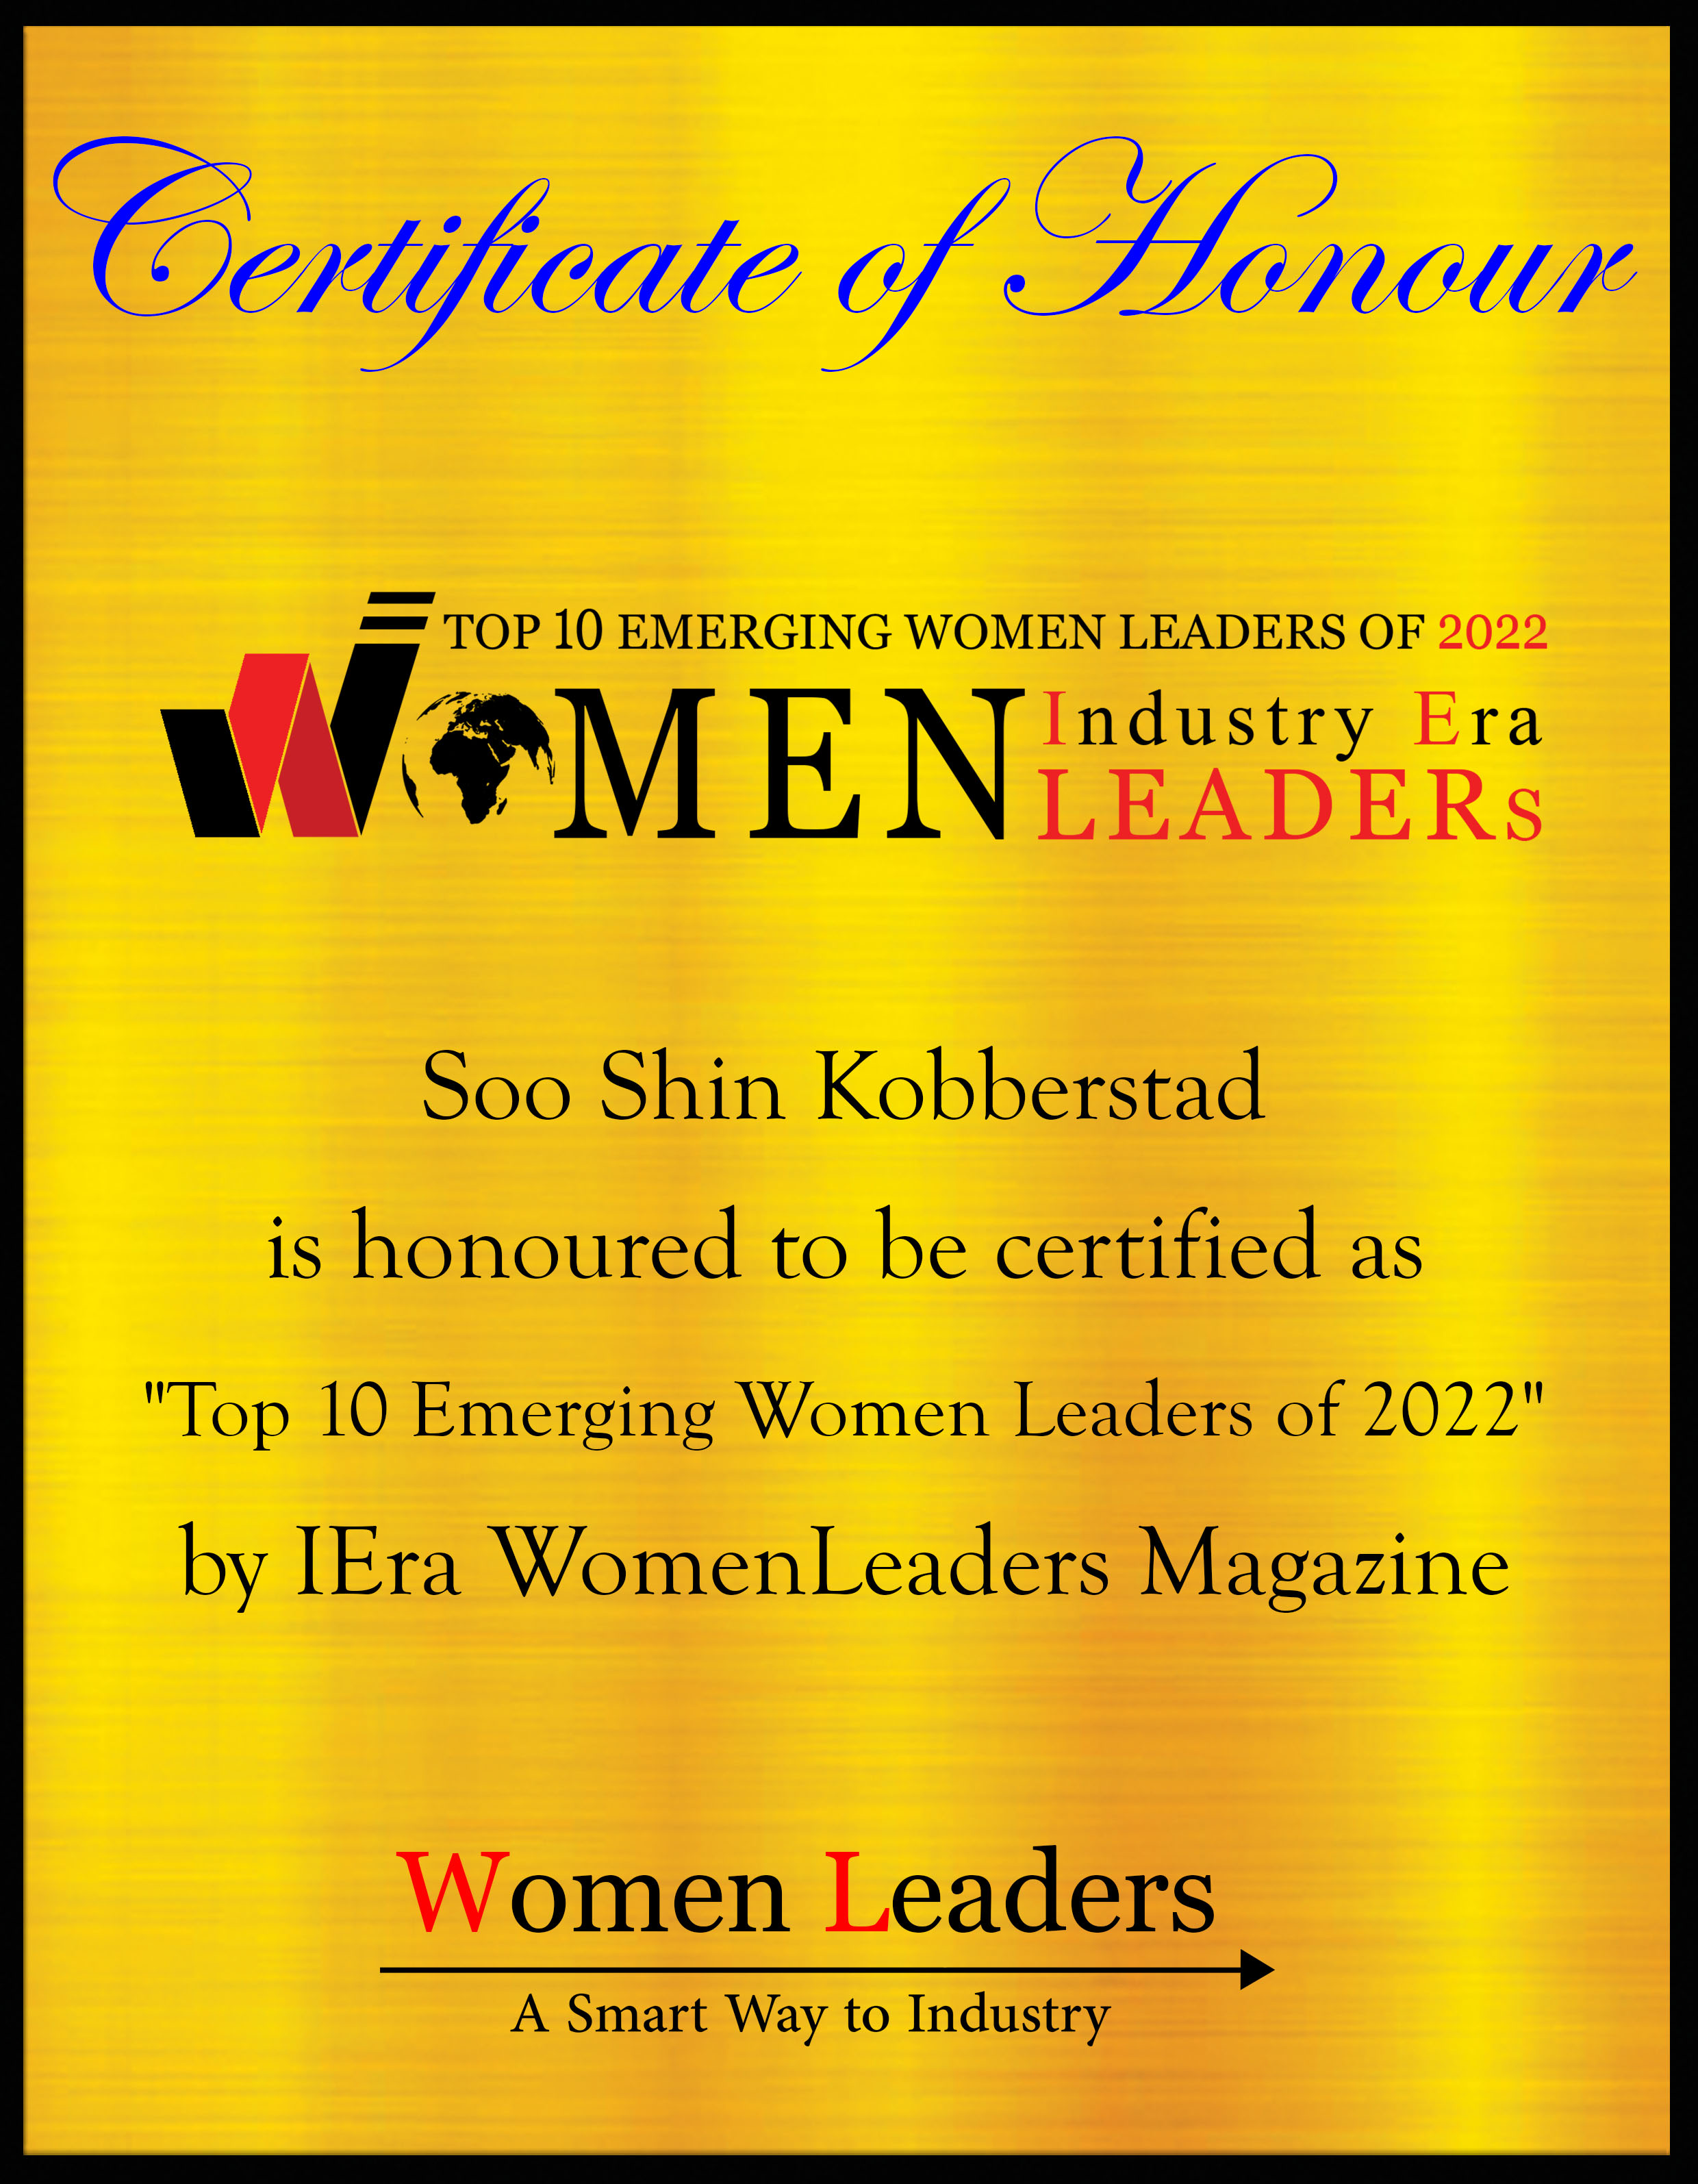 Soo Shin Kobberstad, Research Consultant at bfinance, Most Empowering Women Leaders of 2022